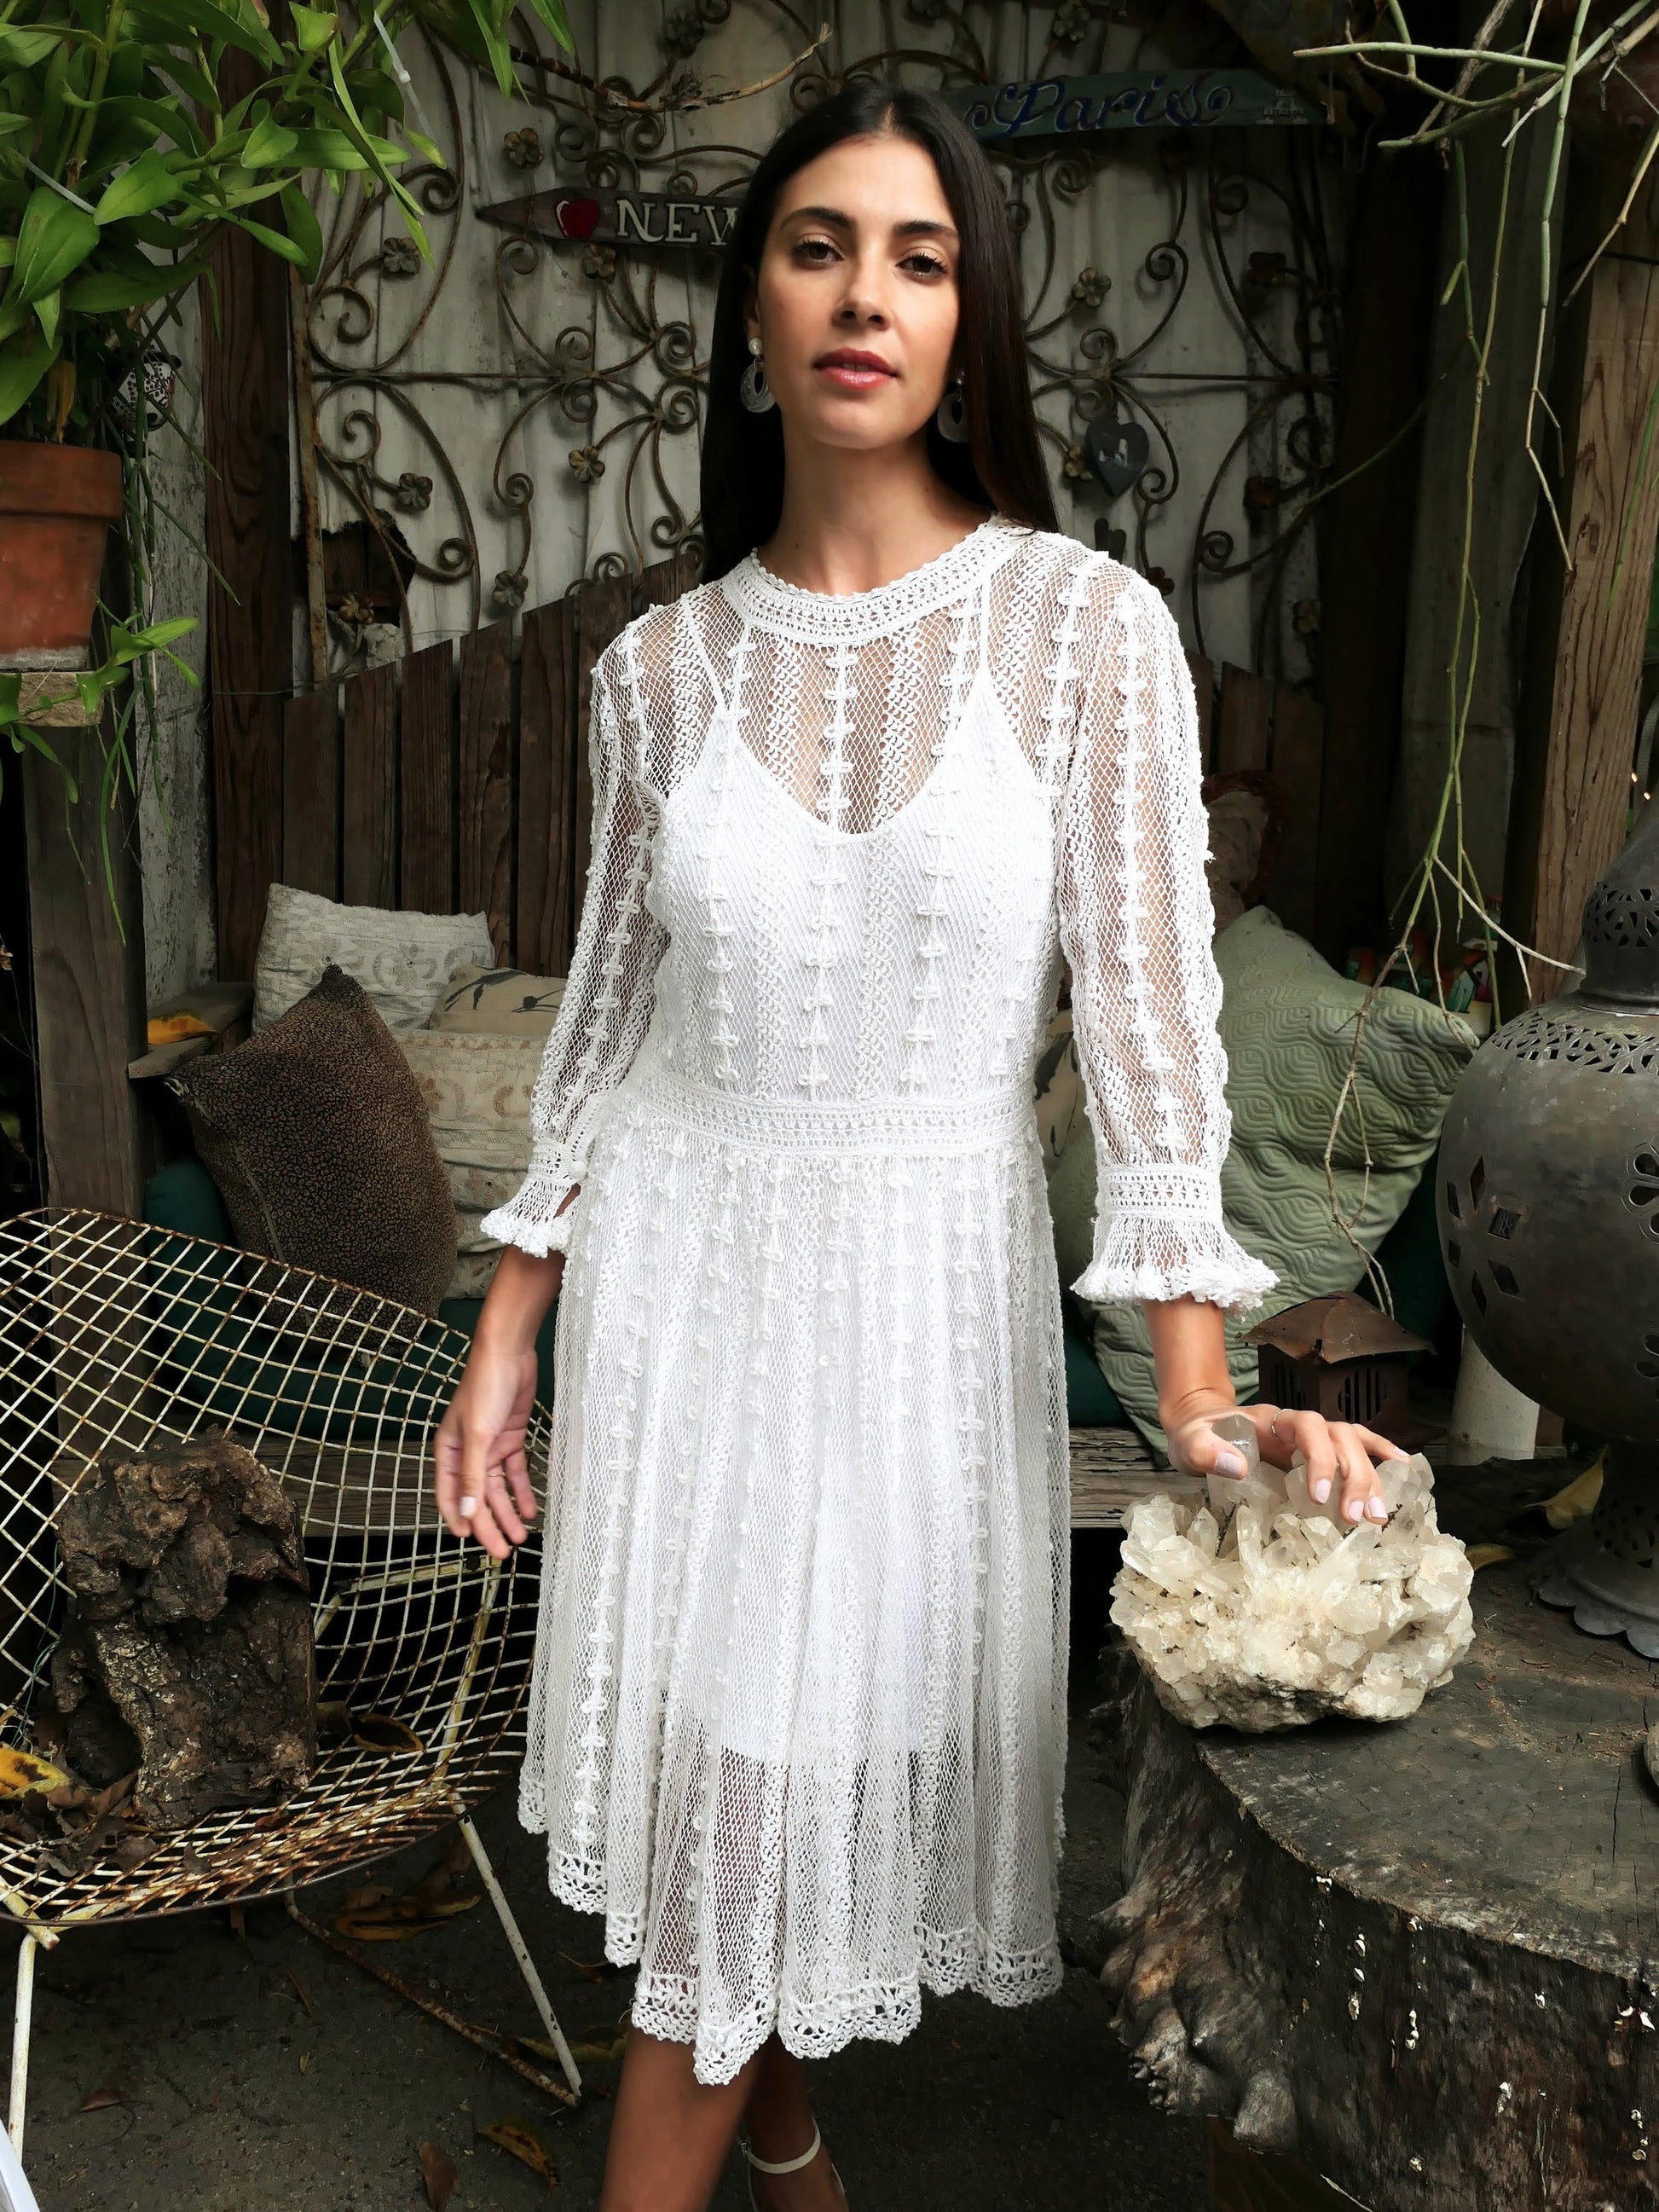 Lim's Vintage original crochet cottage core style dress. This dreamy midi length dress can be worn buttoned up the front or back and is made with very fine threads, making the dress refined and sheer. Detailed crochet trim is used for the waist, hemline, and 3/4 length ruffled sleeves. Wear it with a natural or pink colored slip or bandeau bra and bikini shorts and a pair of ankle or knee-high boots to complete the look.